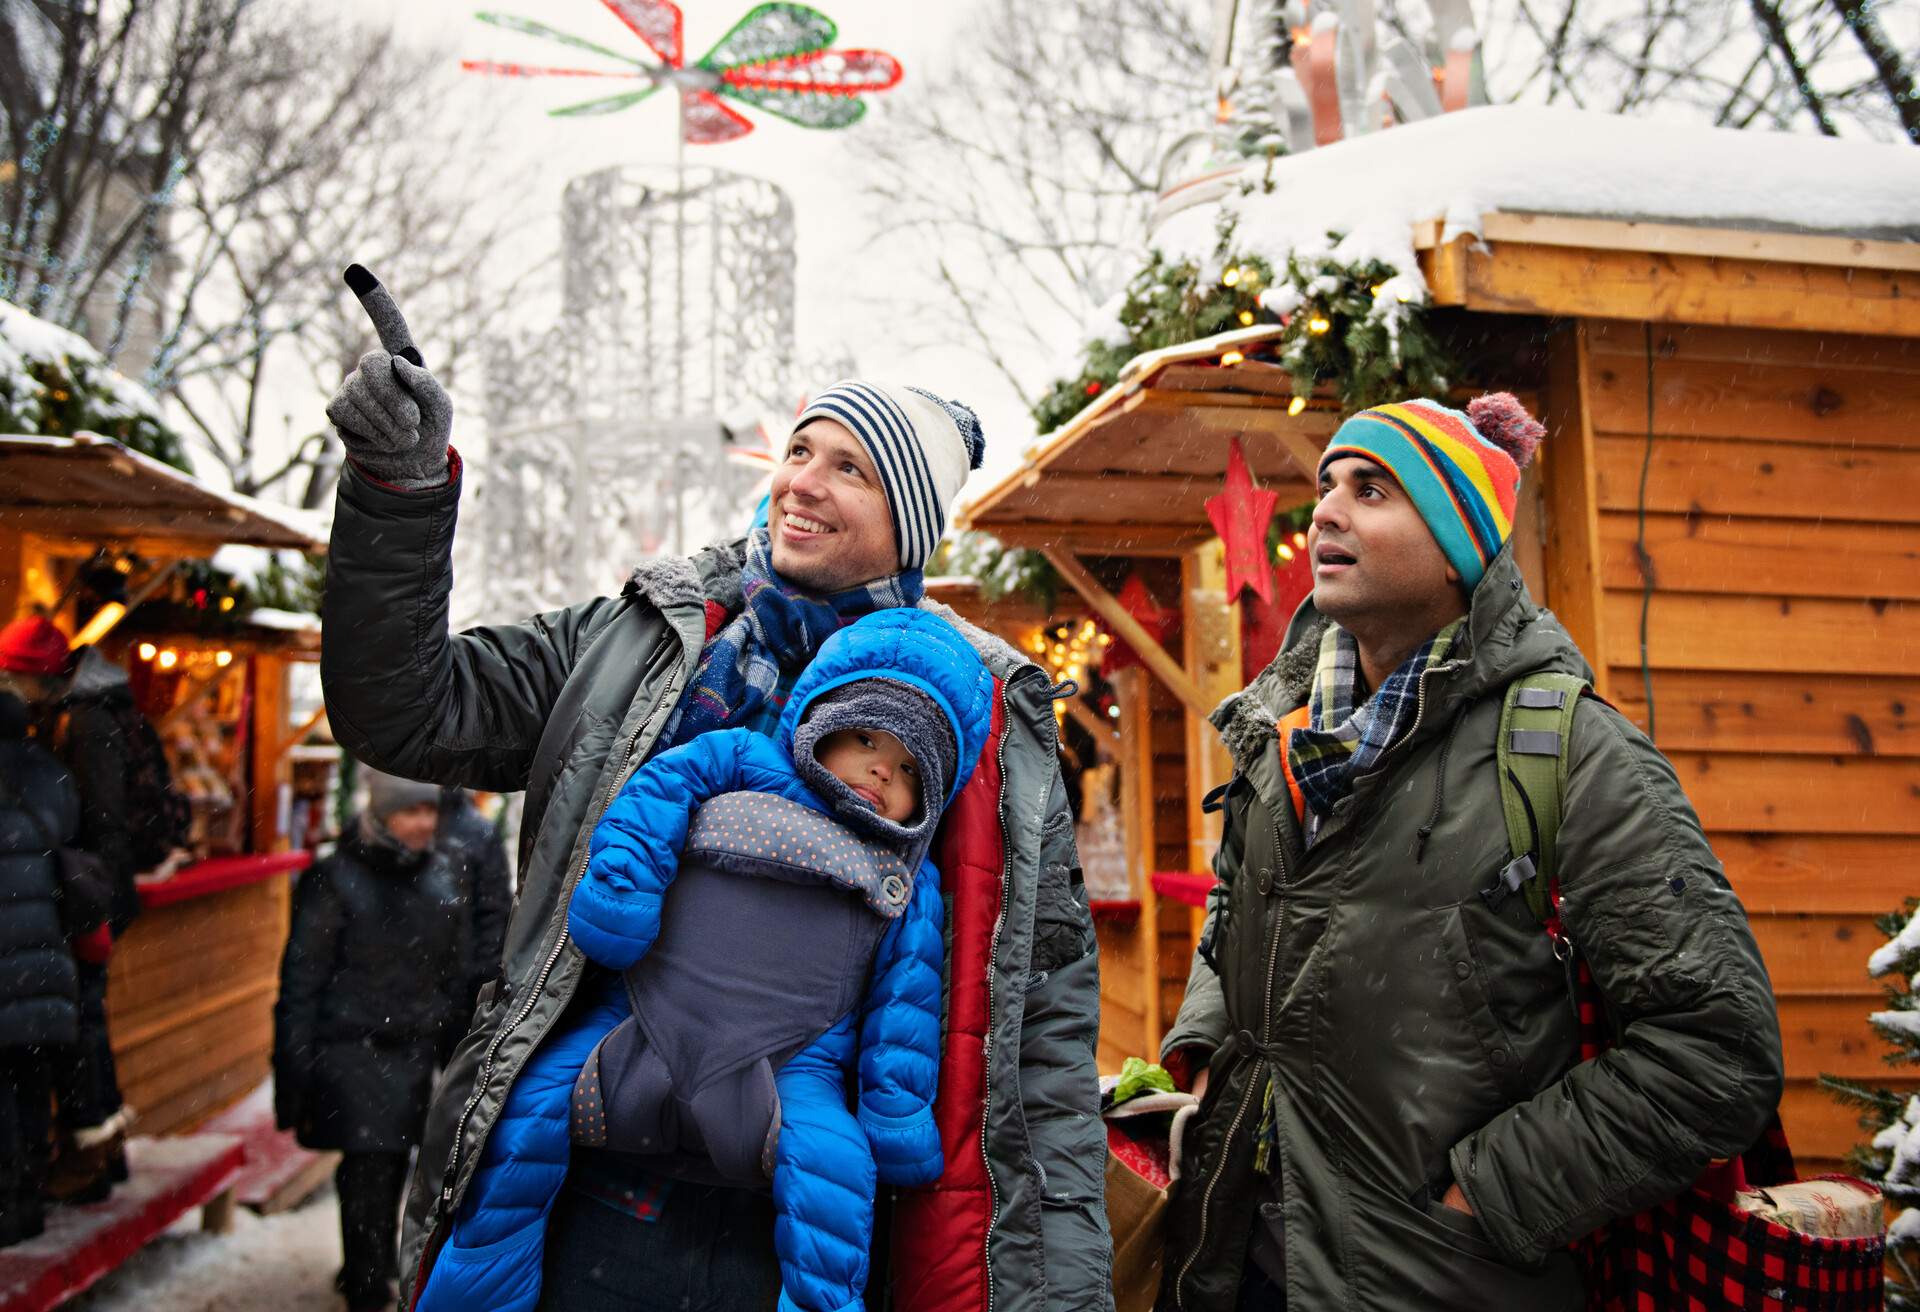 Married gay fathers shopping for Christmas with their one year old mixed race  baby adopted at the Christmas Market in Quebec Canada. One of the daddy carrying his baby in a backpack in front of him. The guide follow them to explain the ancestral life of Quebec.